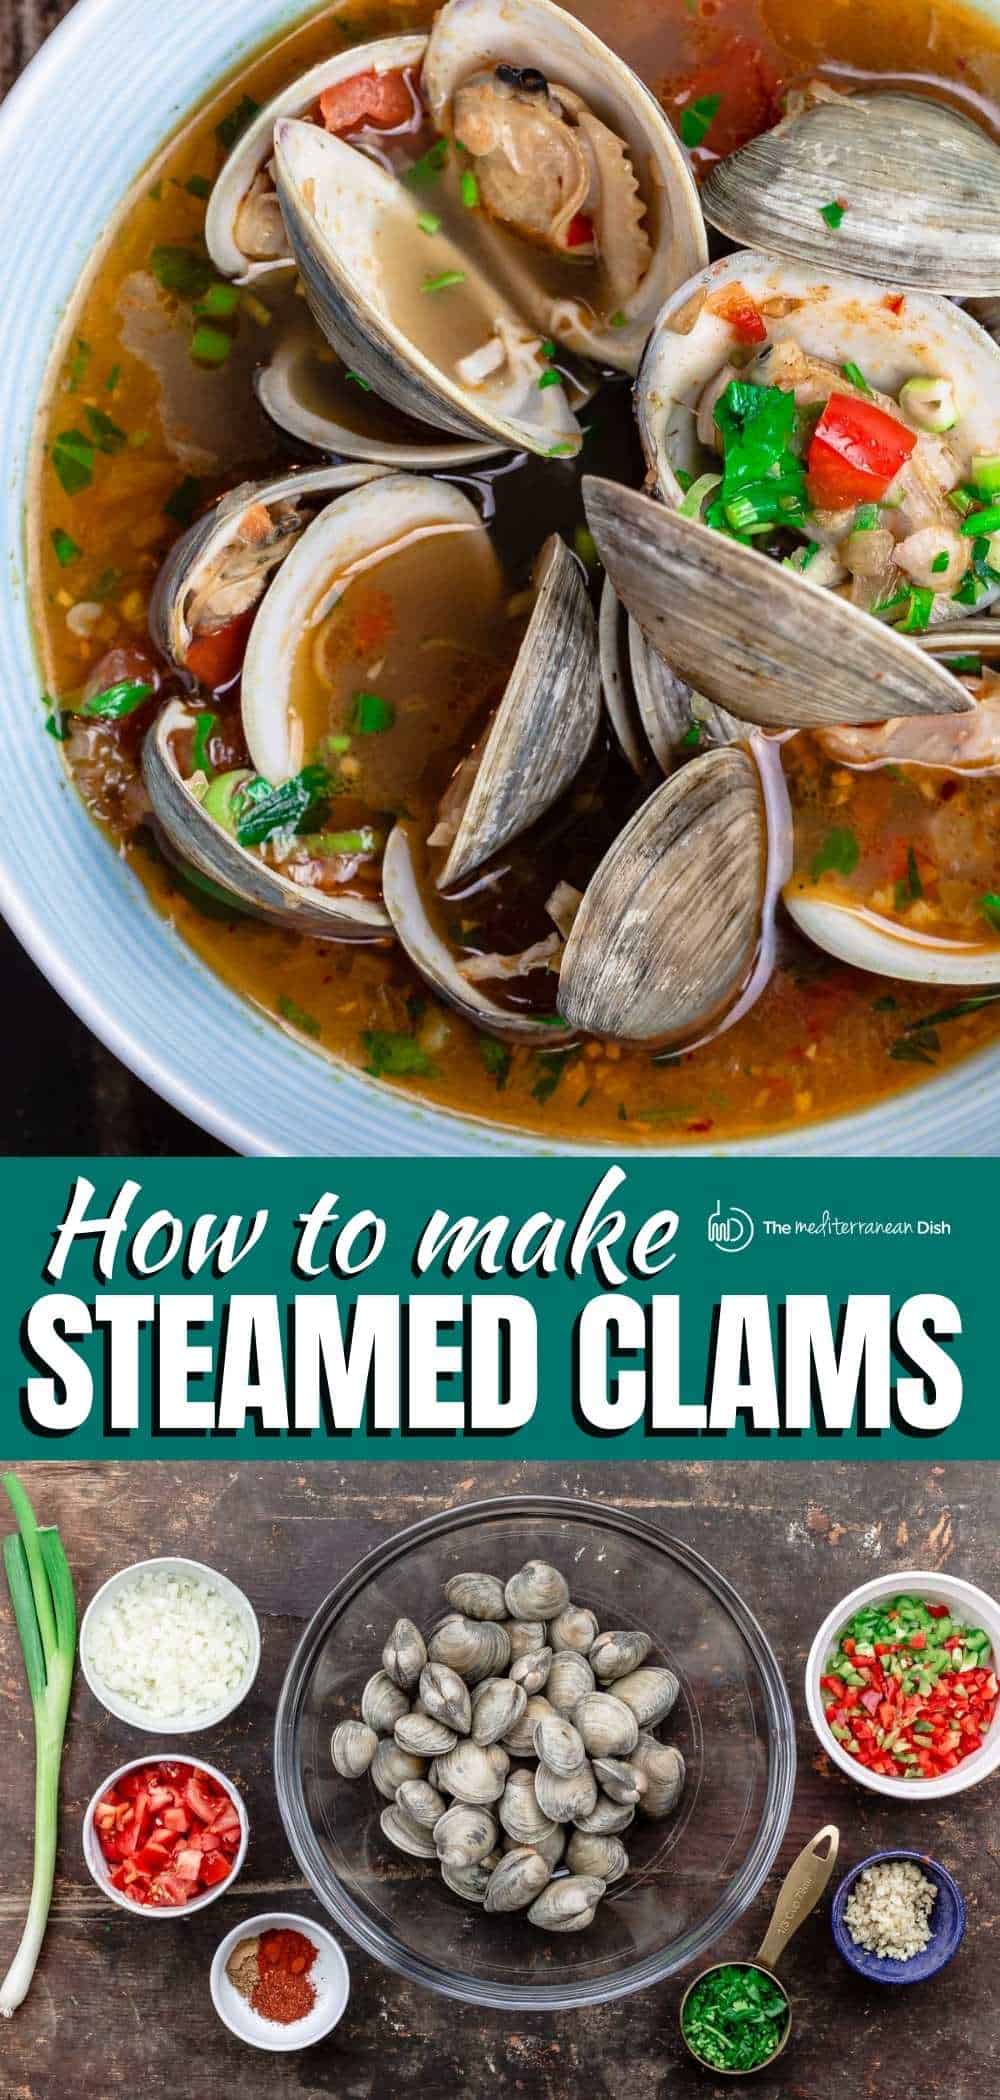 Mediterranean-Style Steamed Clams - How to Cook Clams | The ...